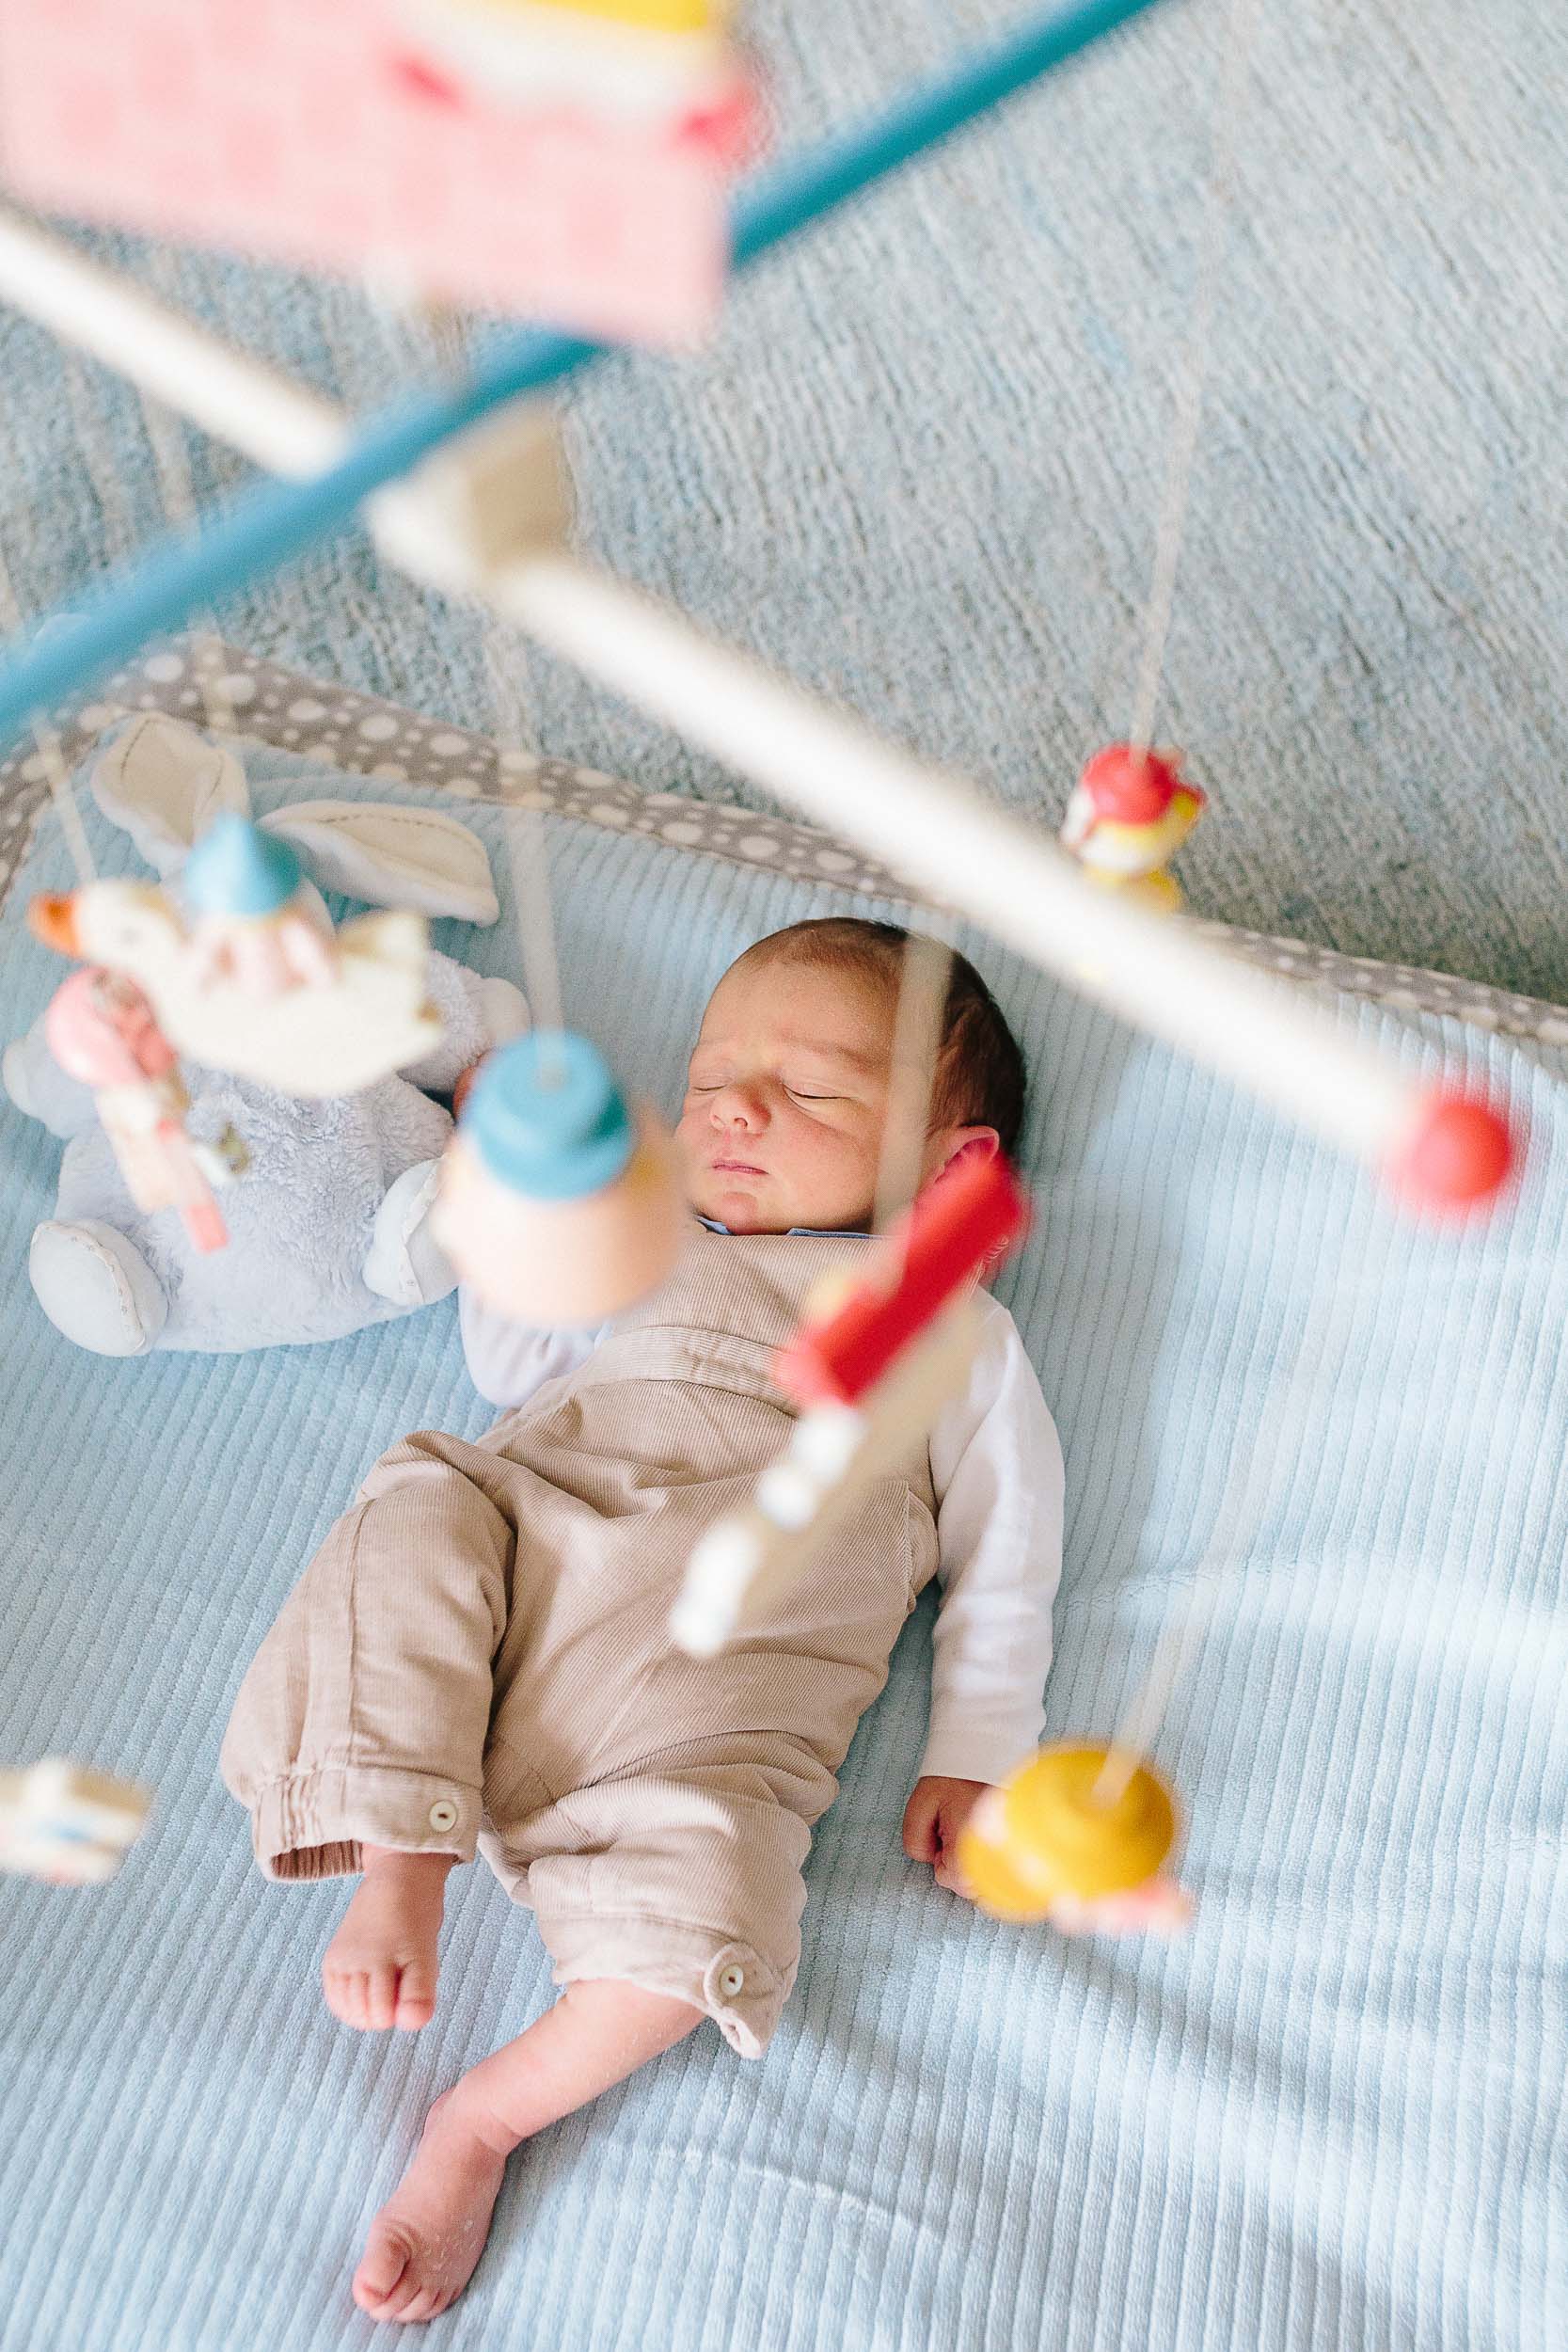 A newborn baby boy lies on his mat with a mobile hanging above him.